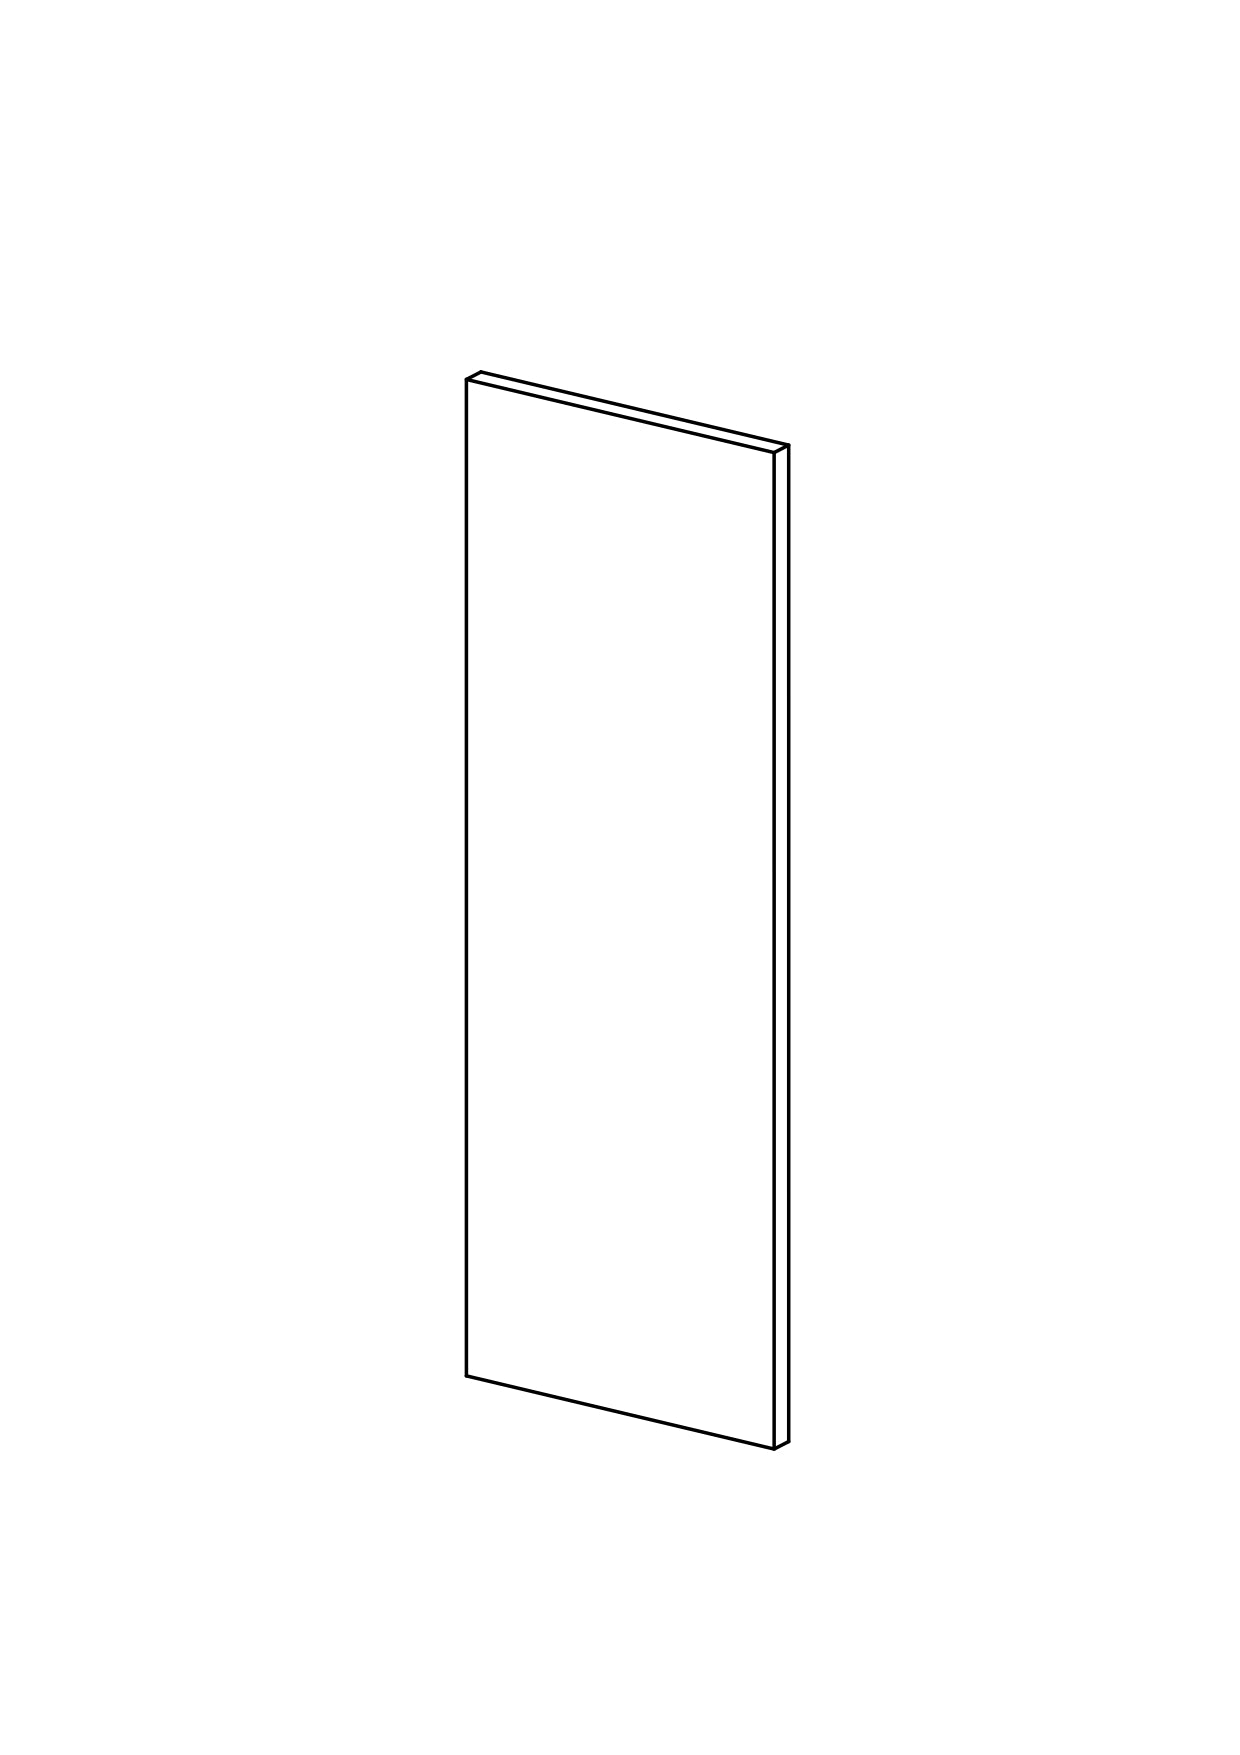 62x180 - Cover Panel - Plain - Unpainted (Raw) - METOD